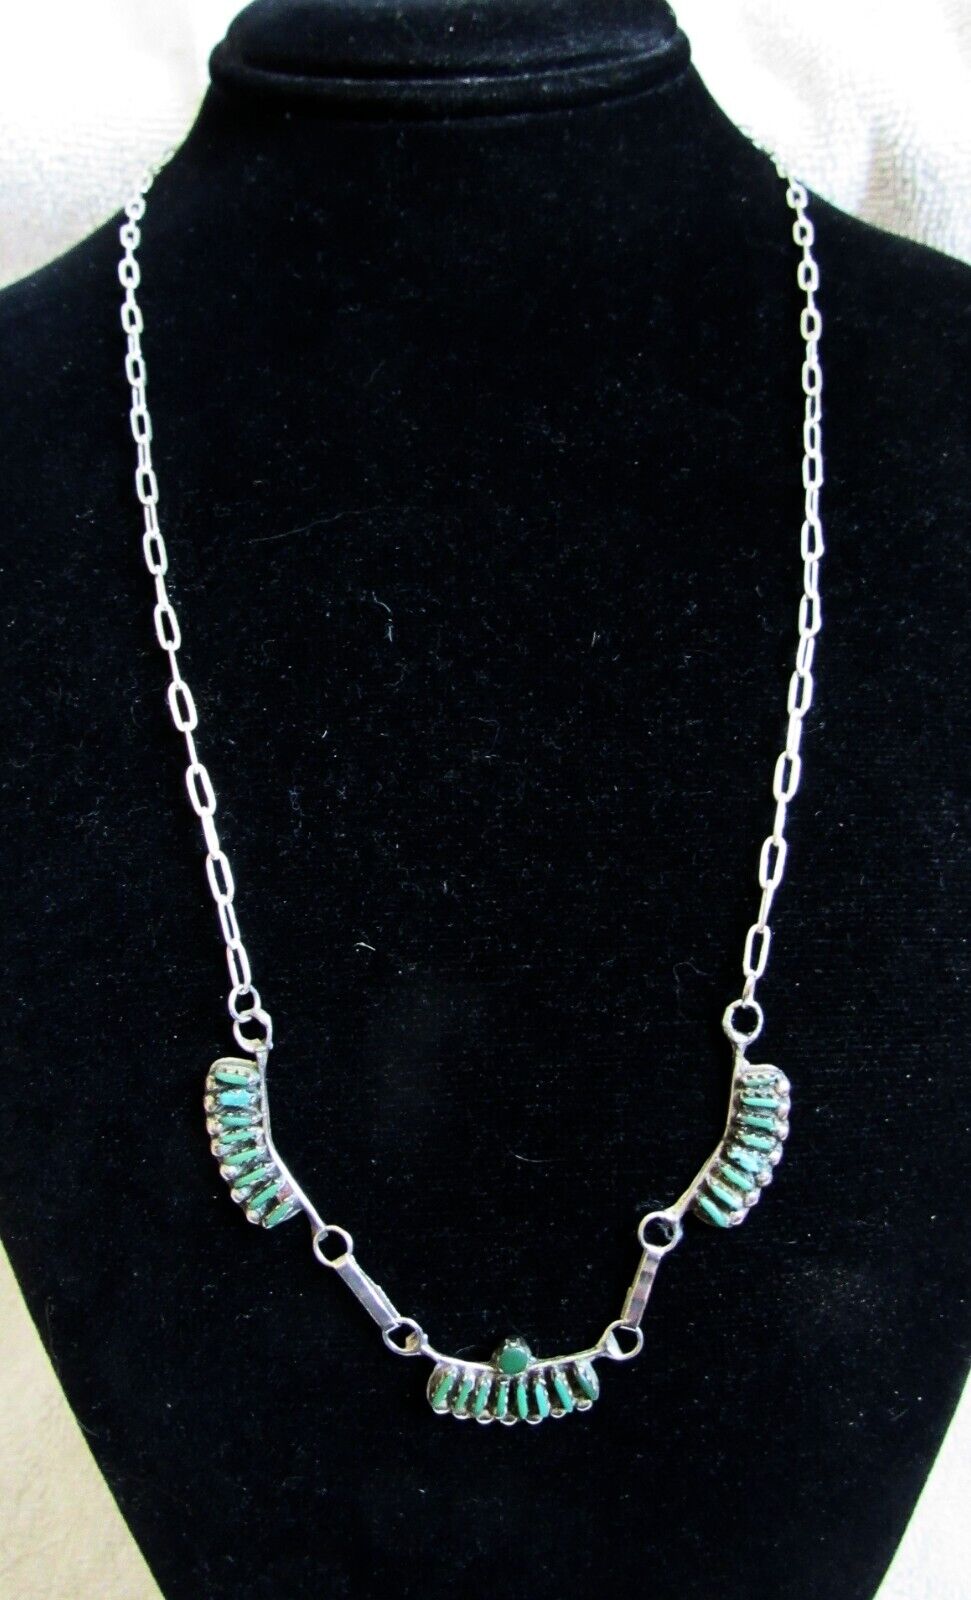 Zuni Indian Needlepoint Cerrillos Turquoise Sterling Silver Pendants Necklace